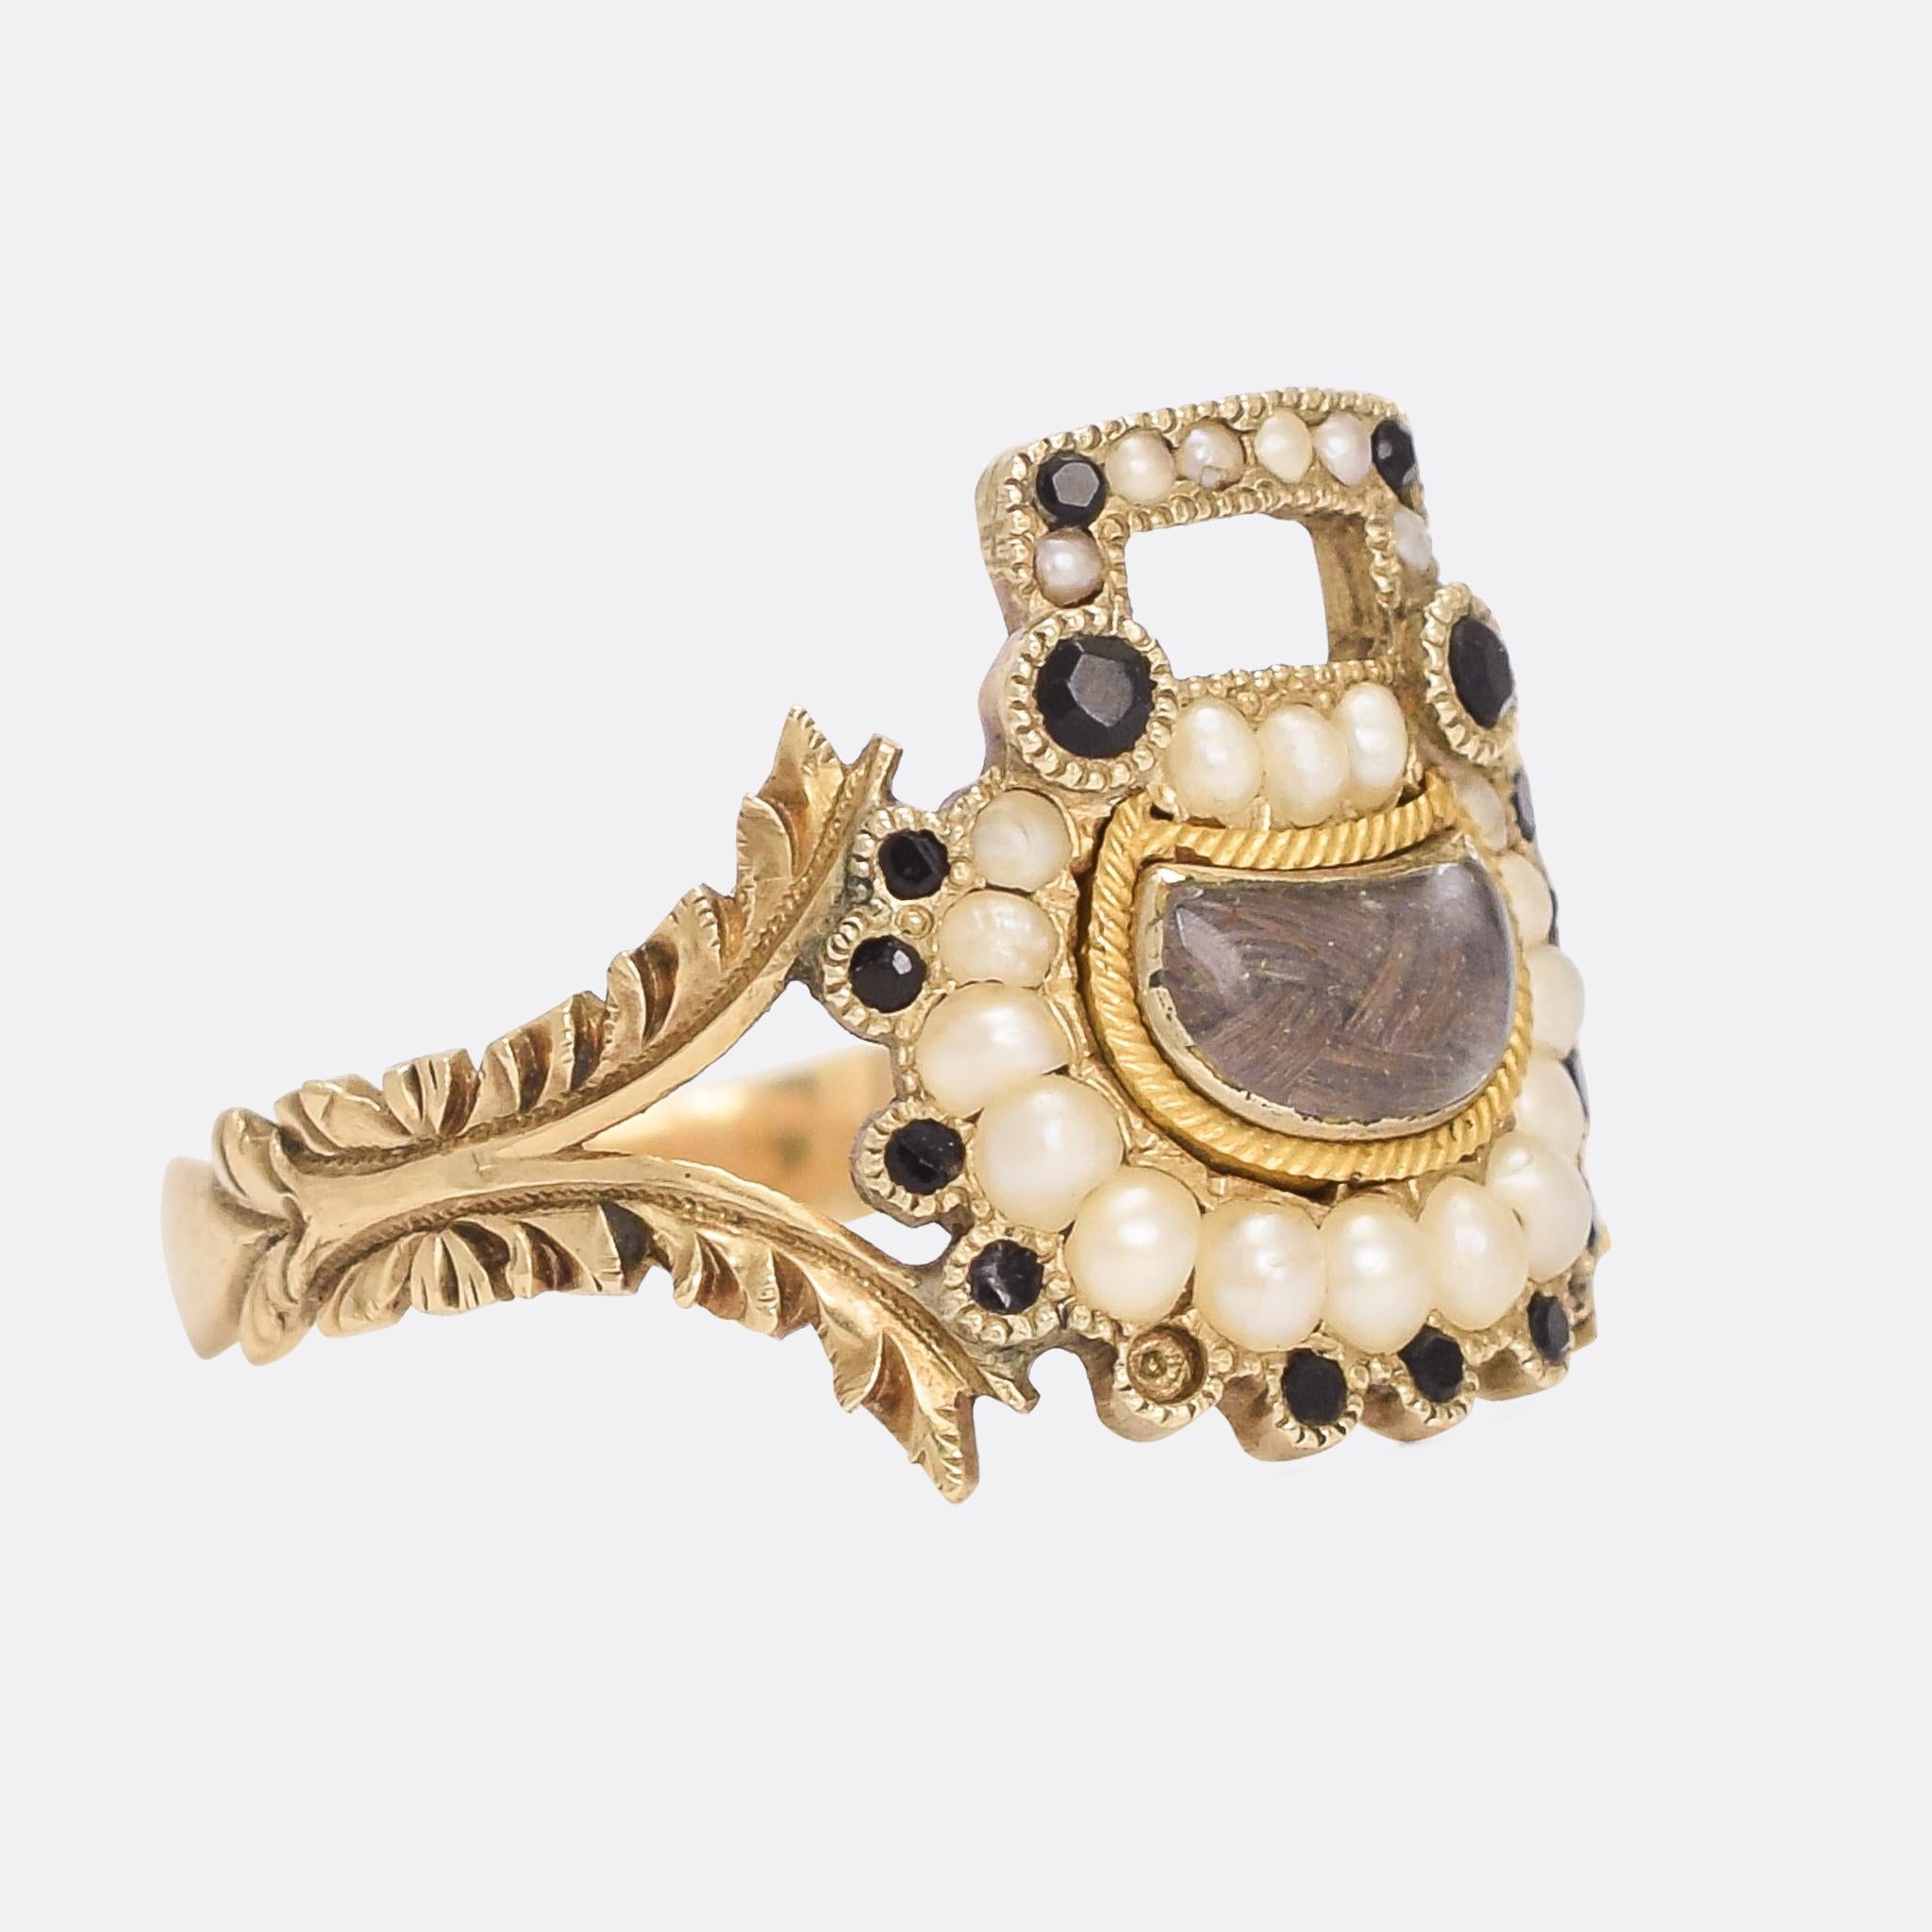 An exceptional Georgian mourning ring dating from the early 19th Century, circa 1810. The head is formed as a padlock, with a central locket compartment and studded with pearls and French jet. The elaborate split shoulders are adorned with foliate